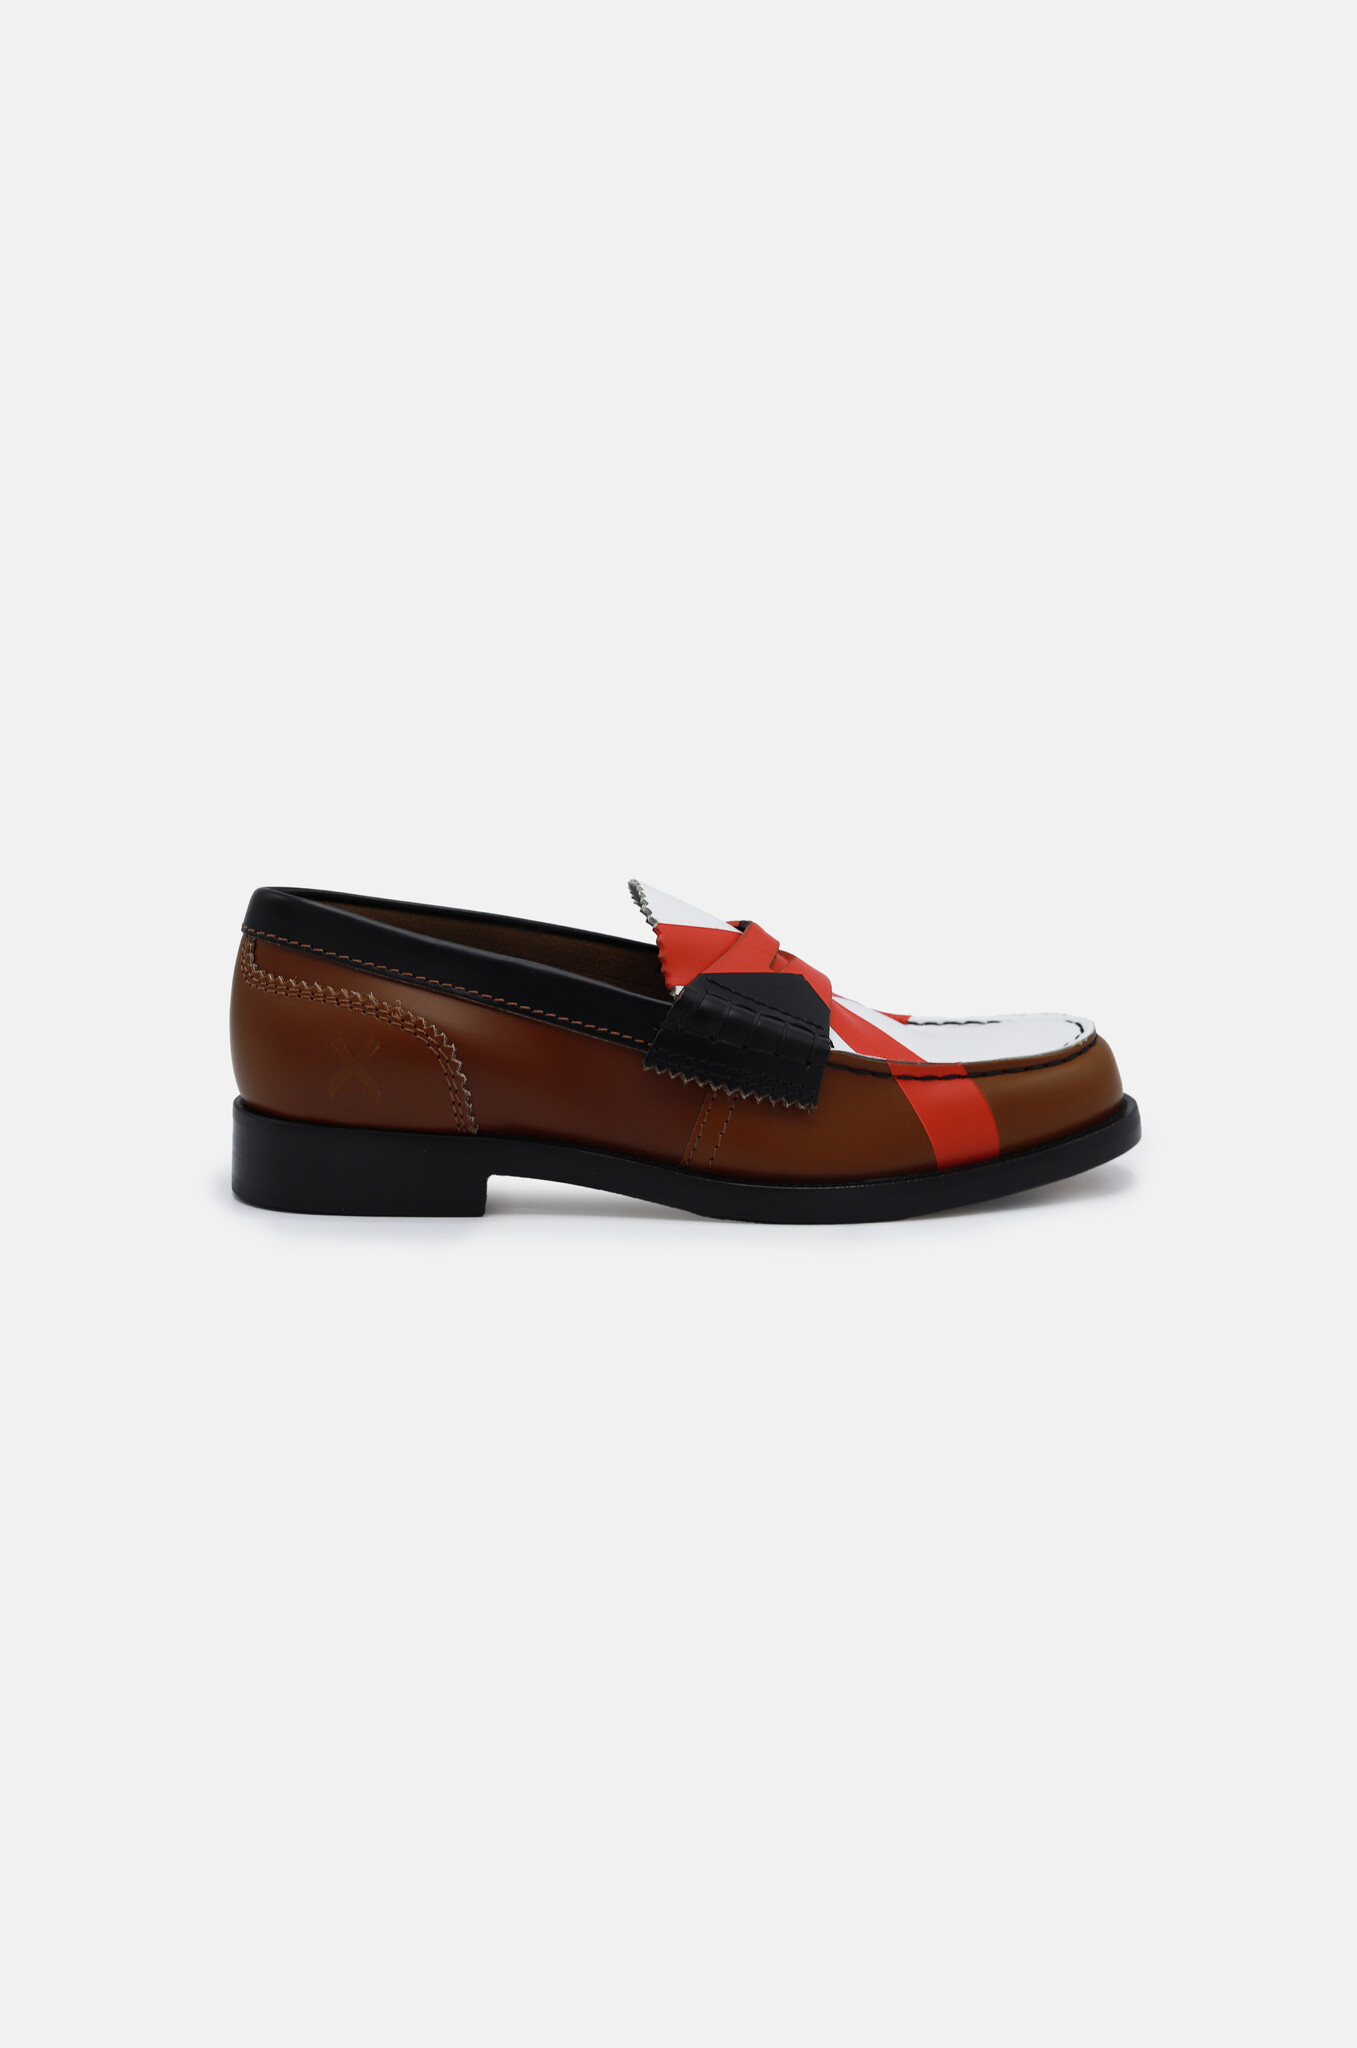 Loafers in Tan Black White X Red-1